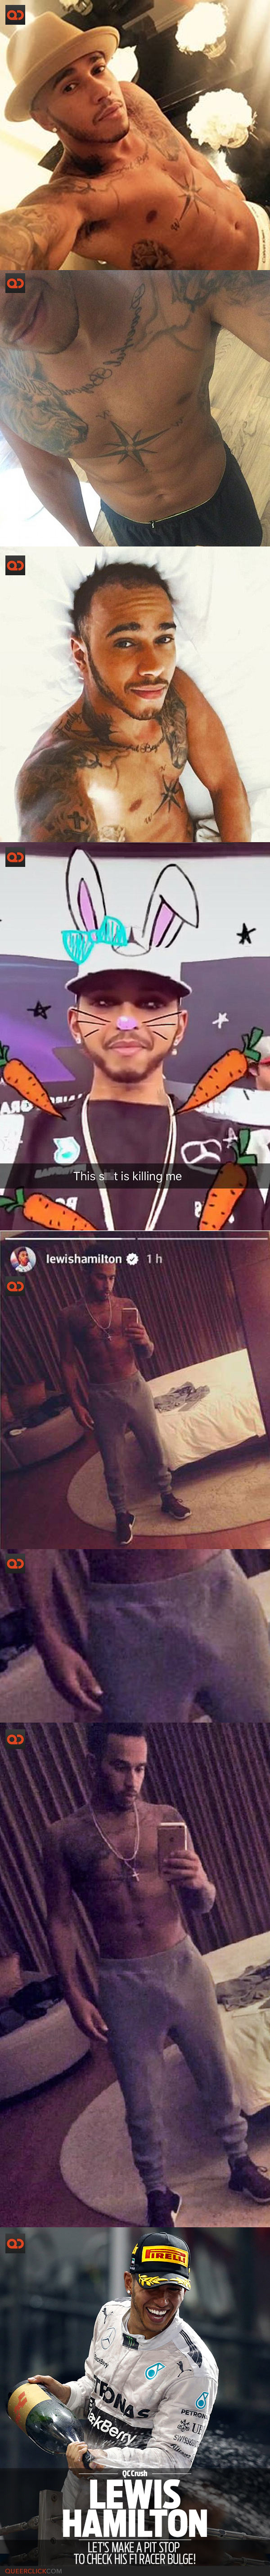 QC Crush: Lewis Hamilton - Let's Make A Pit Stop To Check His F1 Racer Bulge!